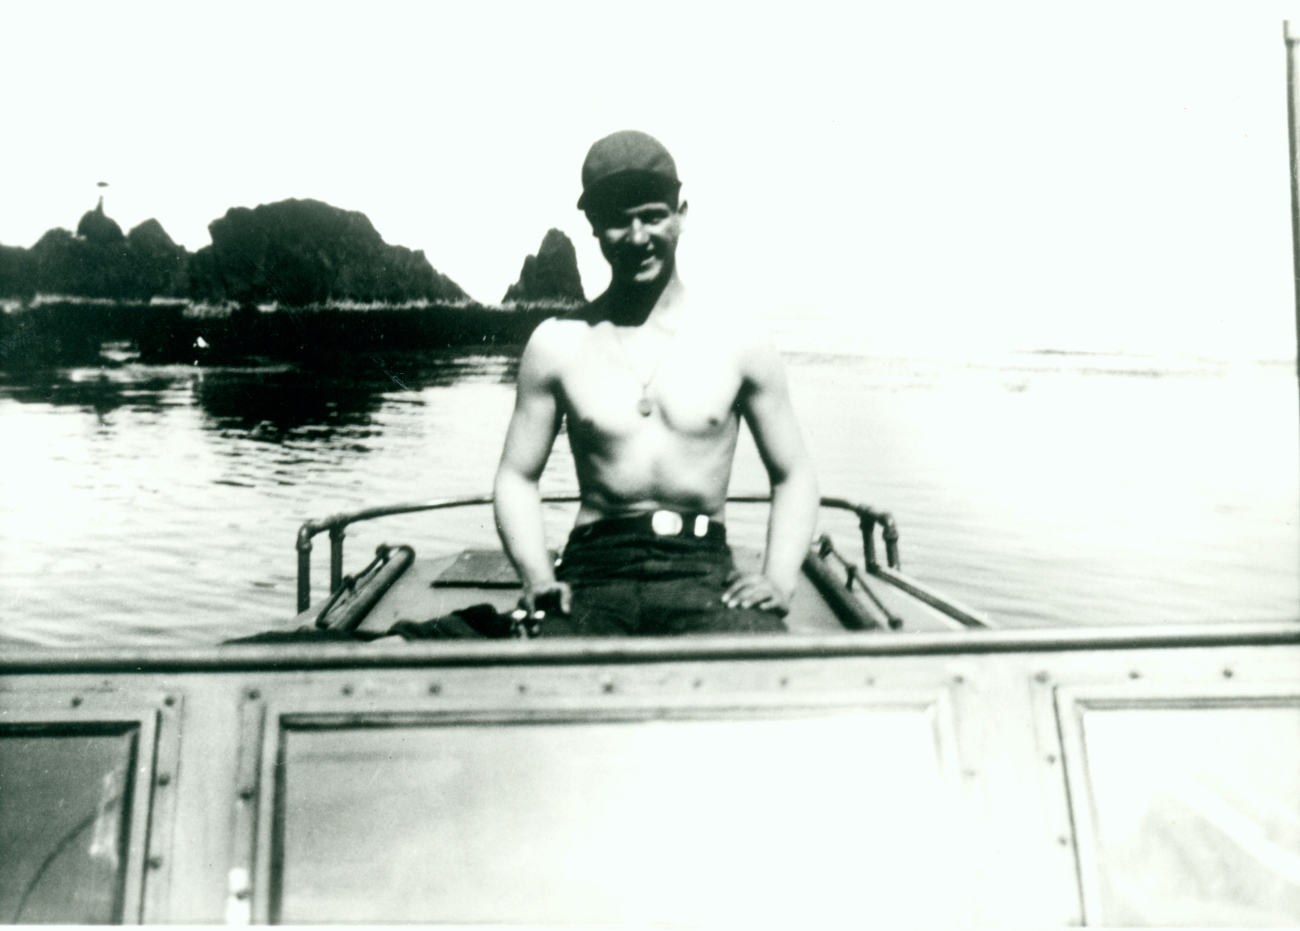 Jerry Randall as coxswain on launch off USC&GS; EXPLORER